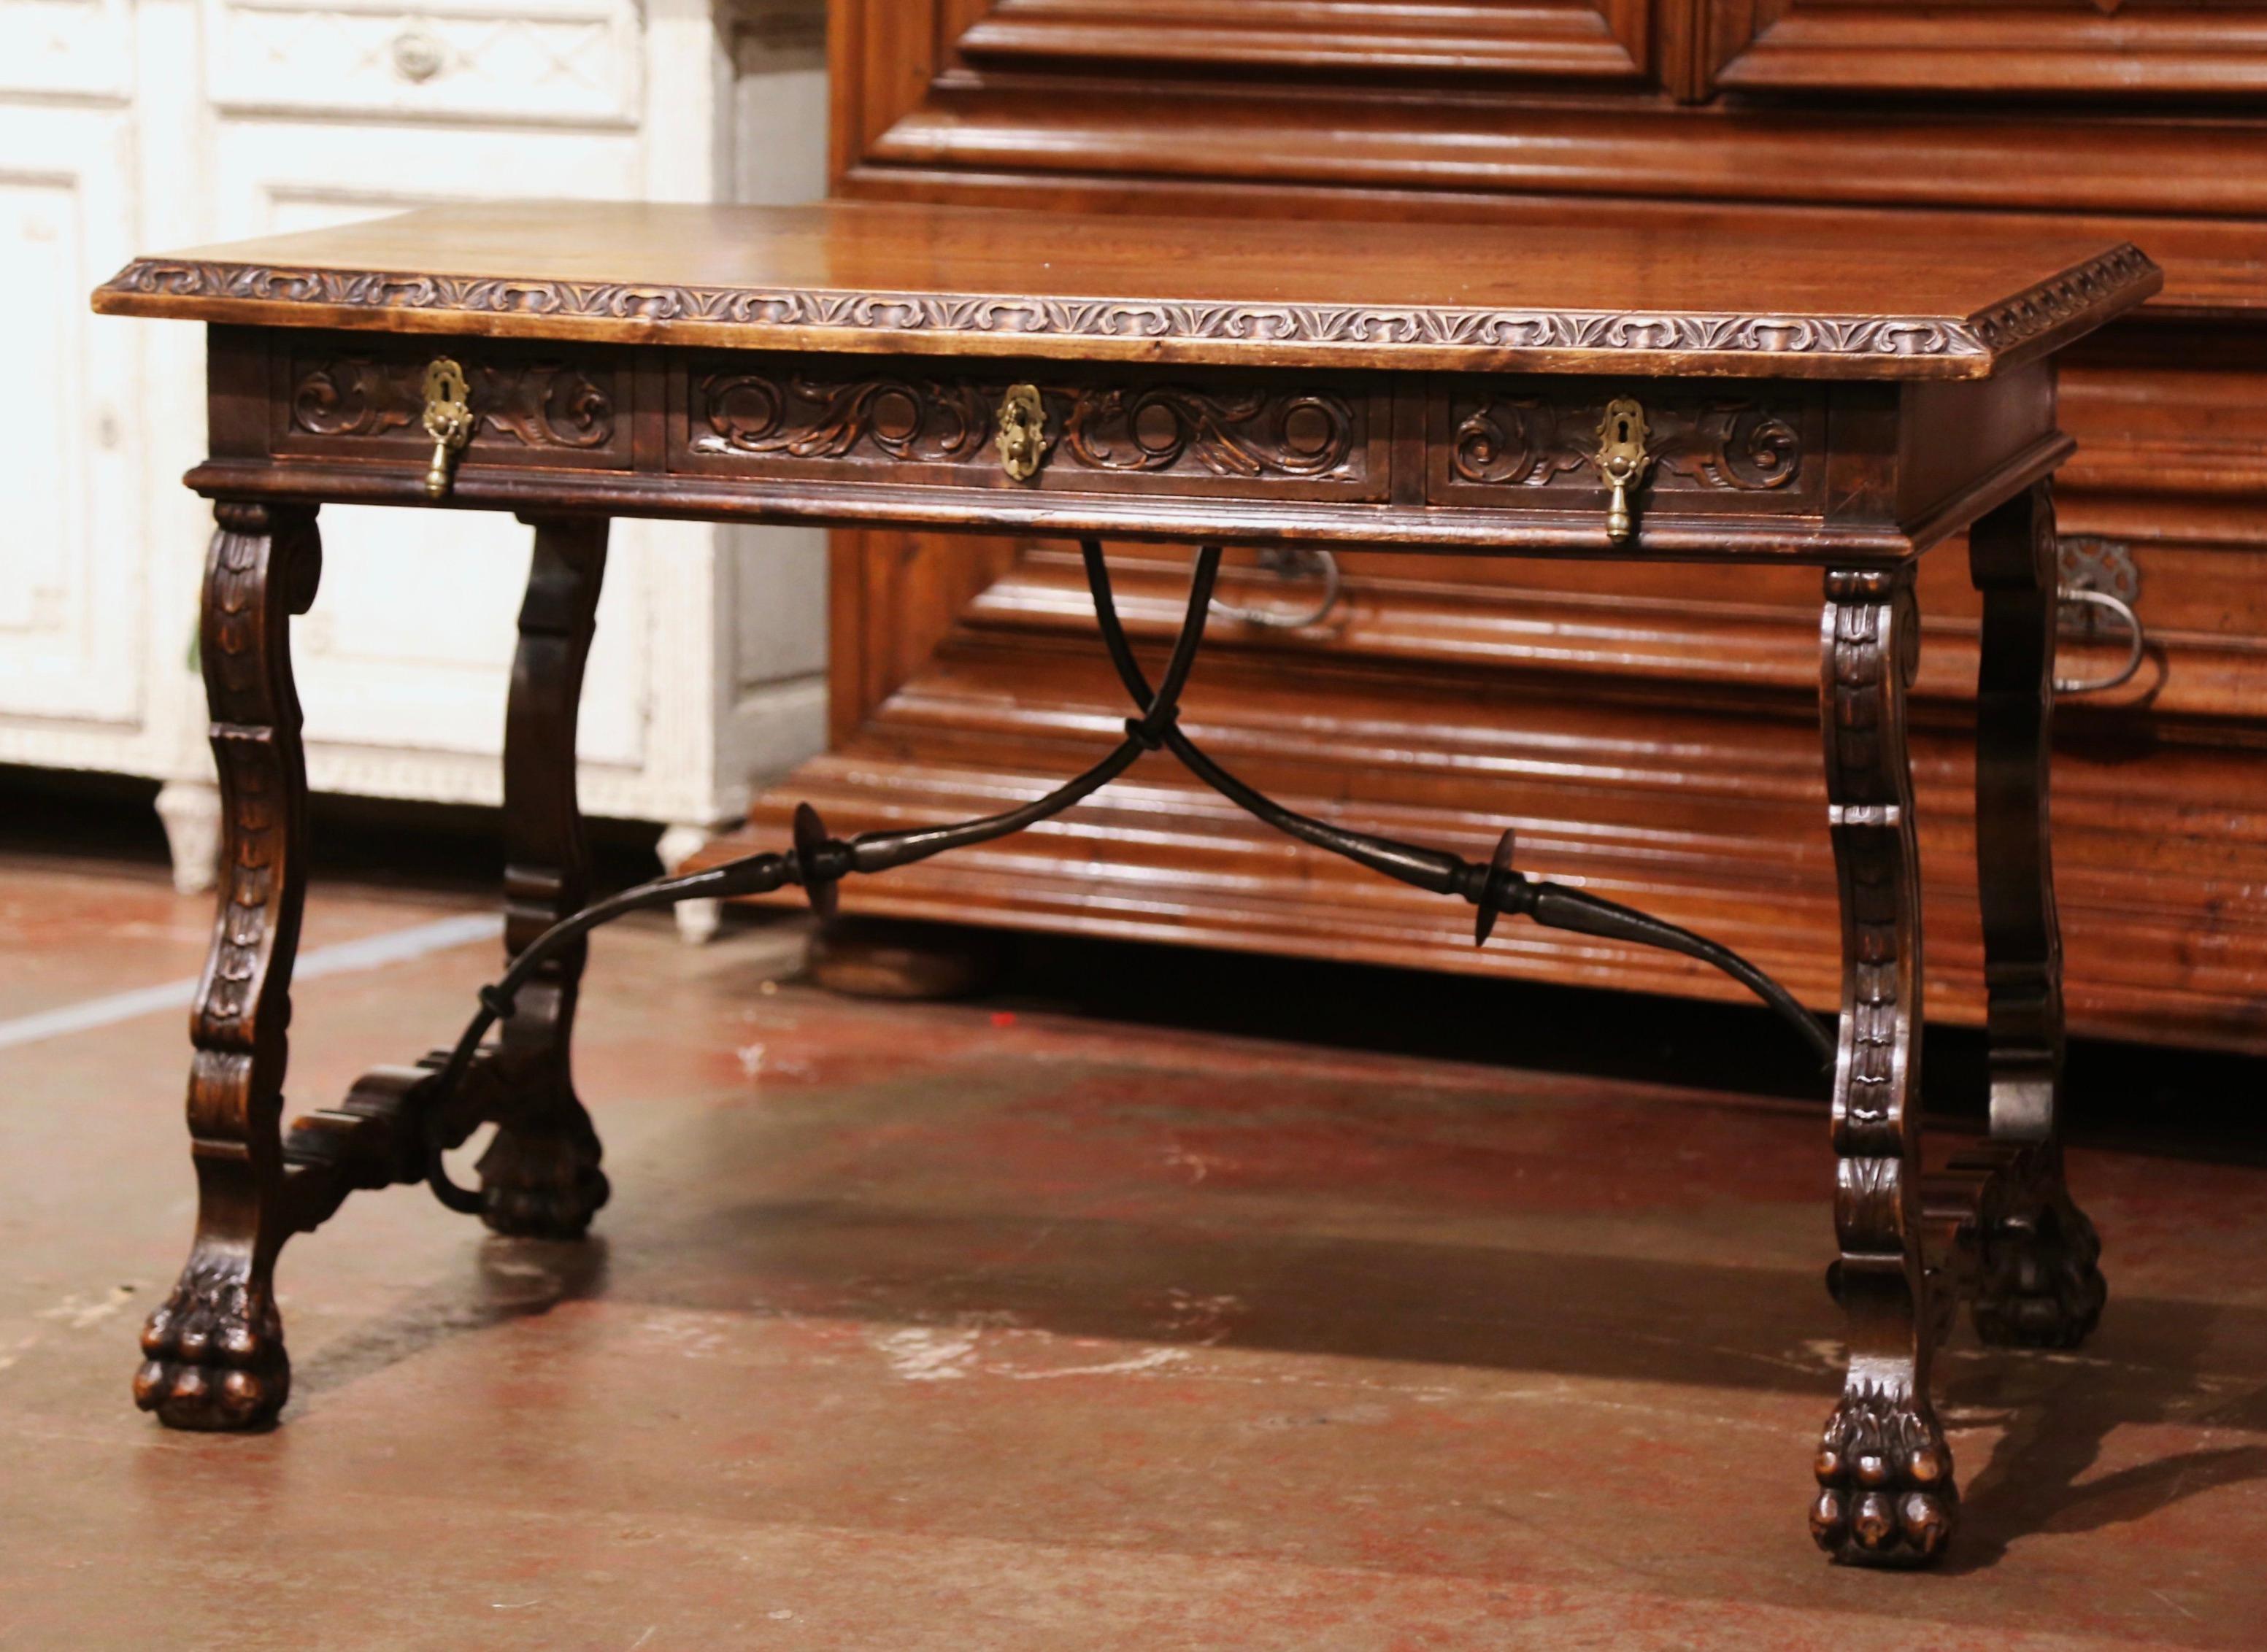 Add an elegant focal point to your study or library with this antique fruitwood desk. Carved in Spain circa 1880, the trestle table stands on two intricate carved legs ending with paw feet, and connected with a thick forged wrought iron stretcher.